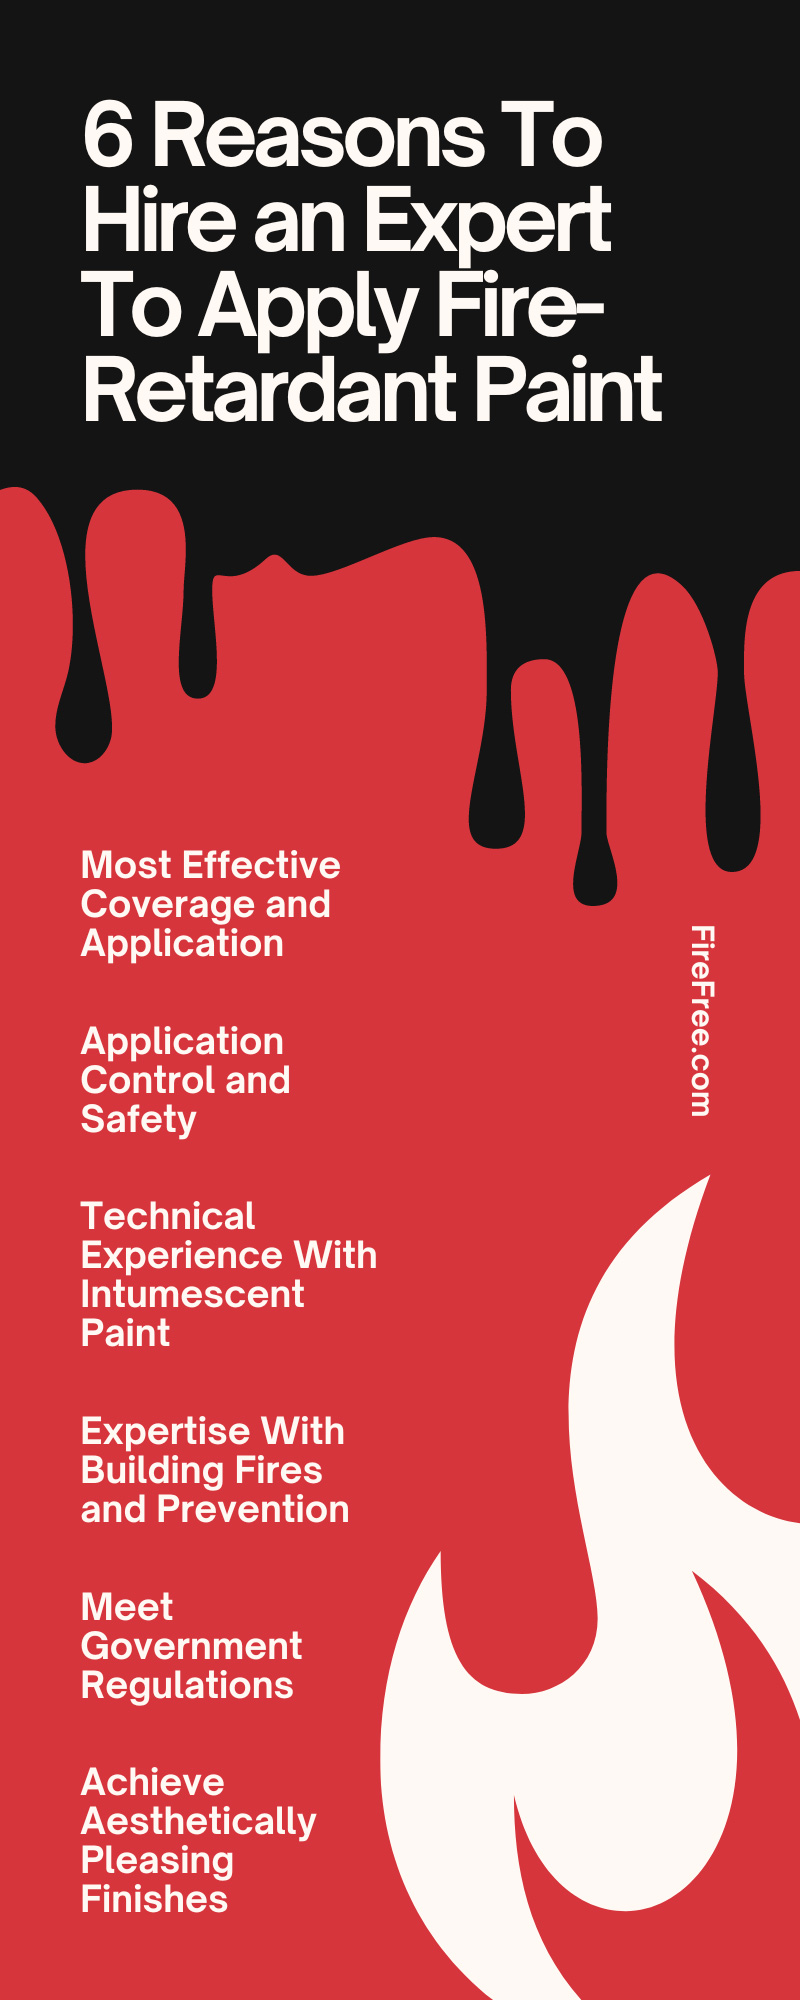 6 Reasons To Hire an Expert To Apply Fire-Retardant Paint